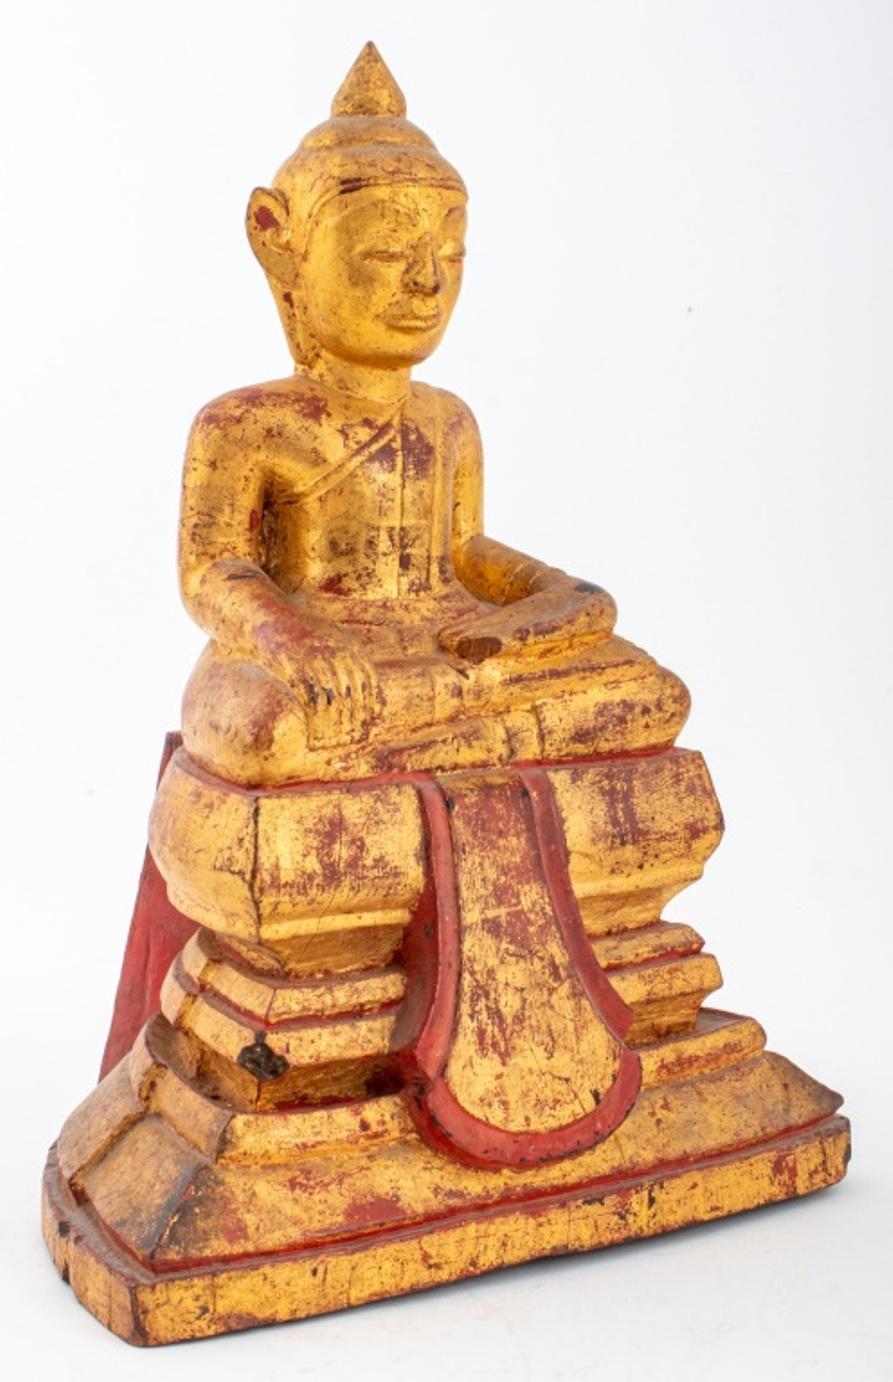 Antique Laos hand-carved and gilt lacquered wood sculpture depicting the enlightened Buddha figure seated atop a tiered base. Provenance: From the collection of Le Lieu and Malcolm Browne (American, 1931-2012), the photojournalist who took the 1963